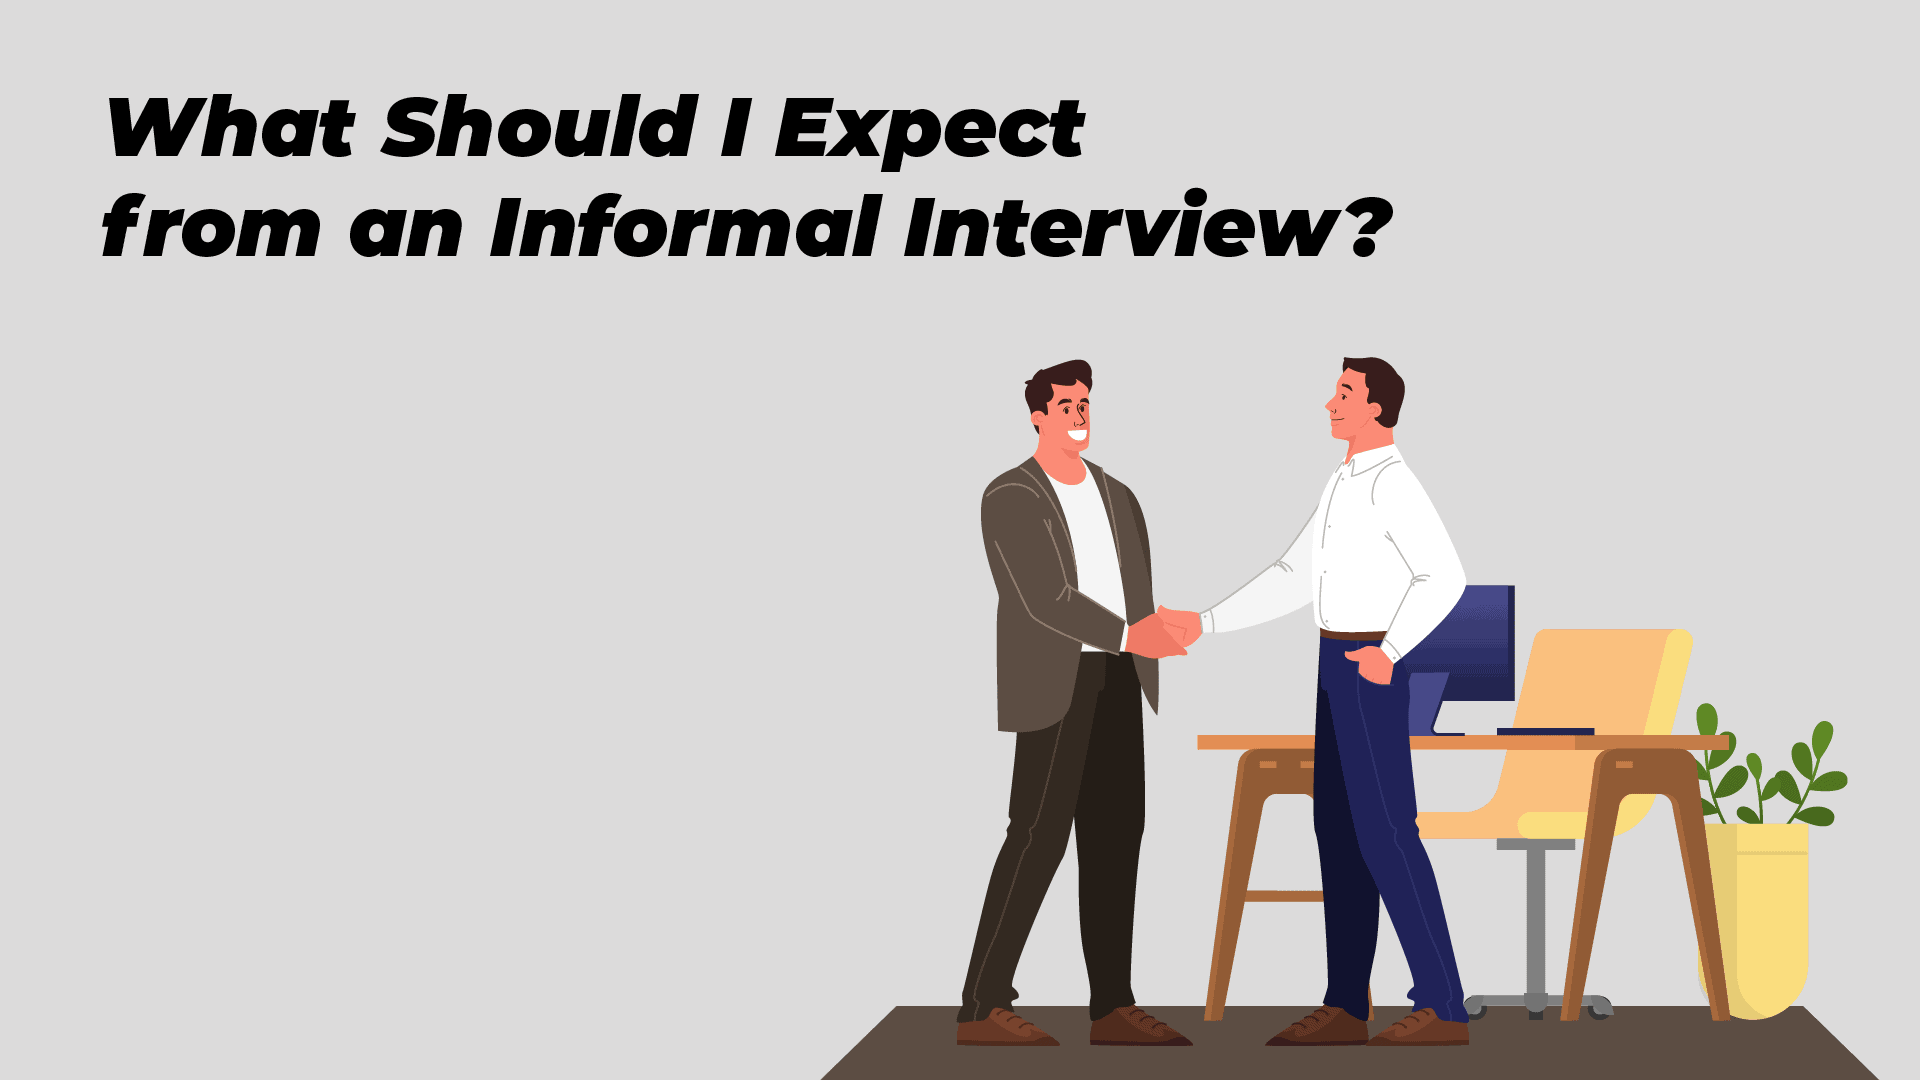 What Should I Expect from an Informal Interview?